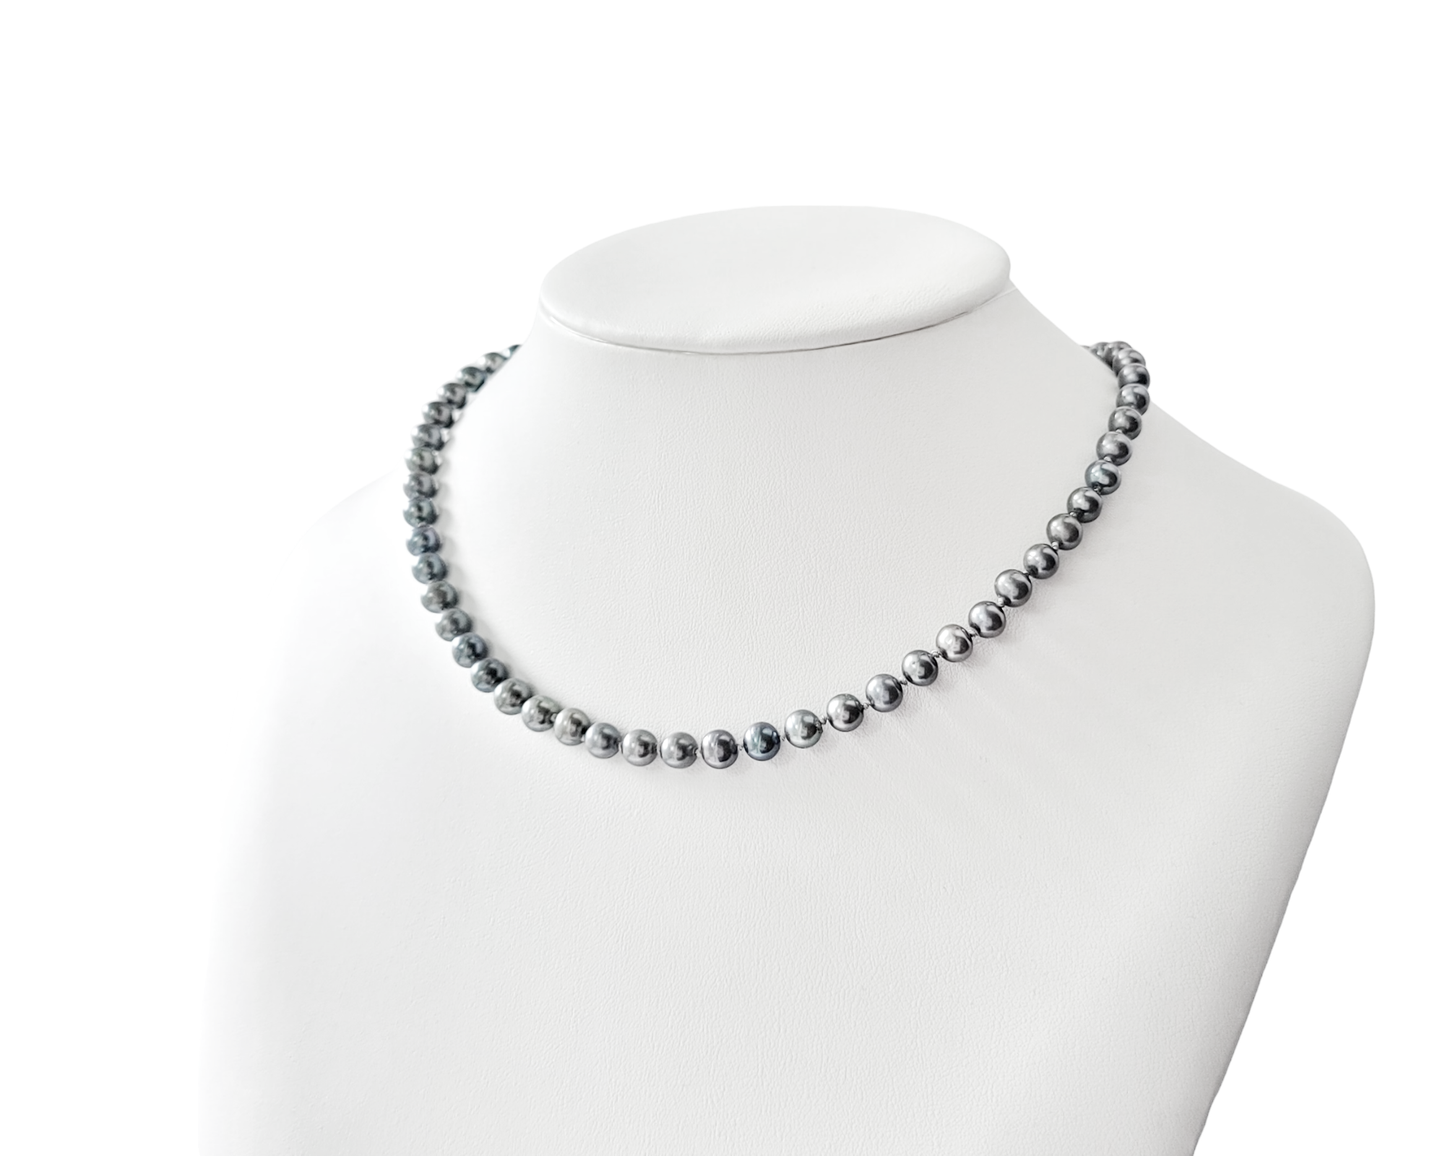 Celestial Brilliance Grey Freshwater Cultured Pearl Necklace, Hand knotted 